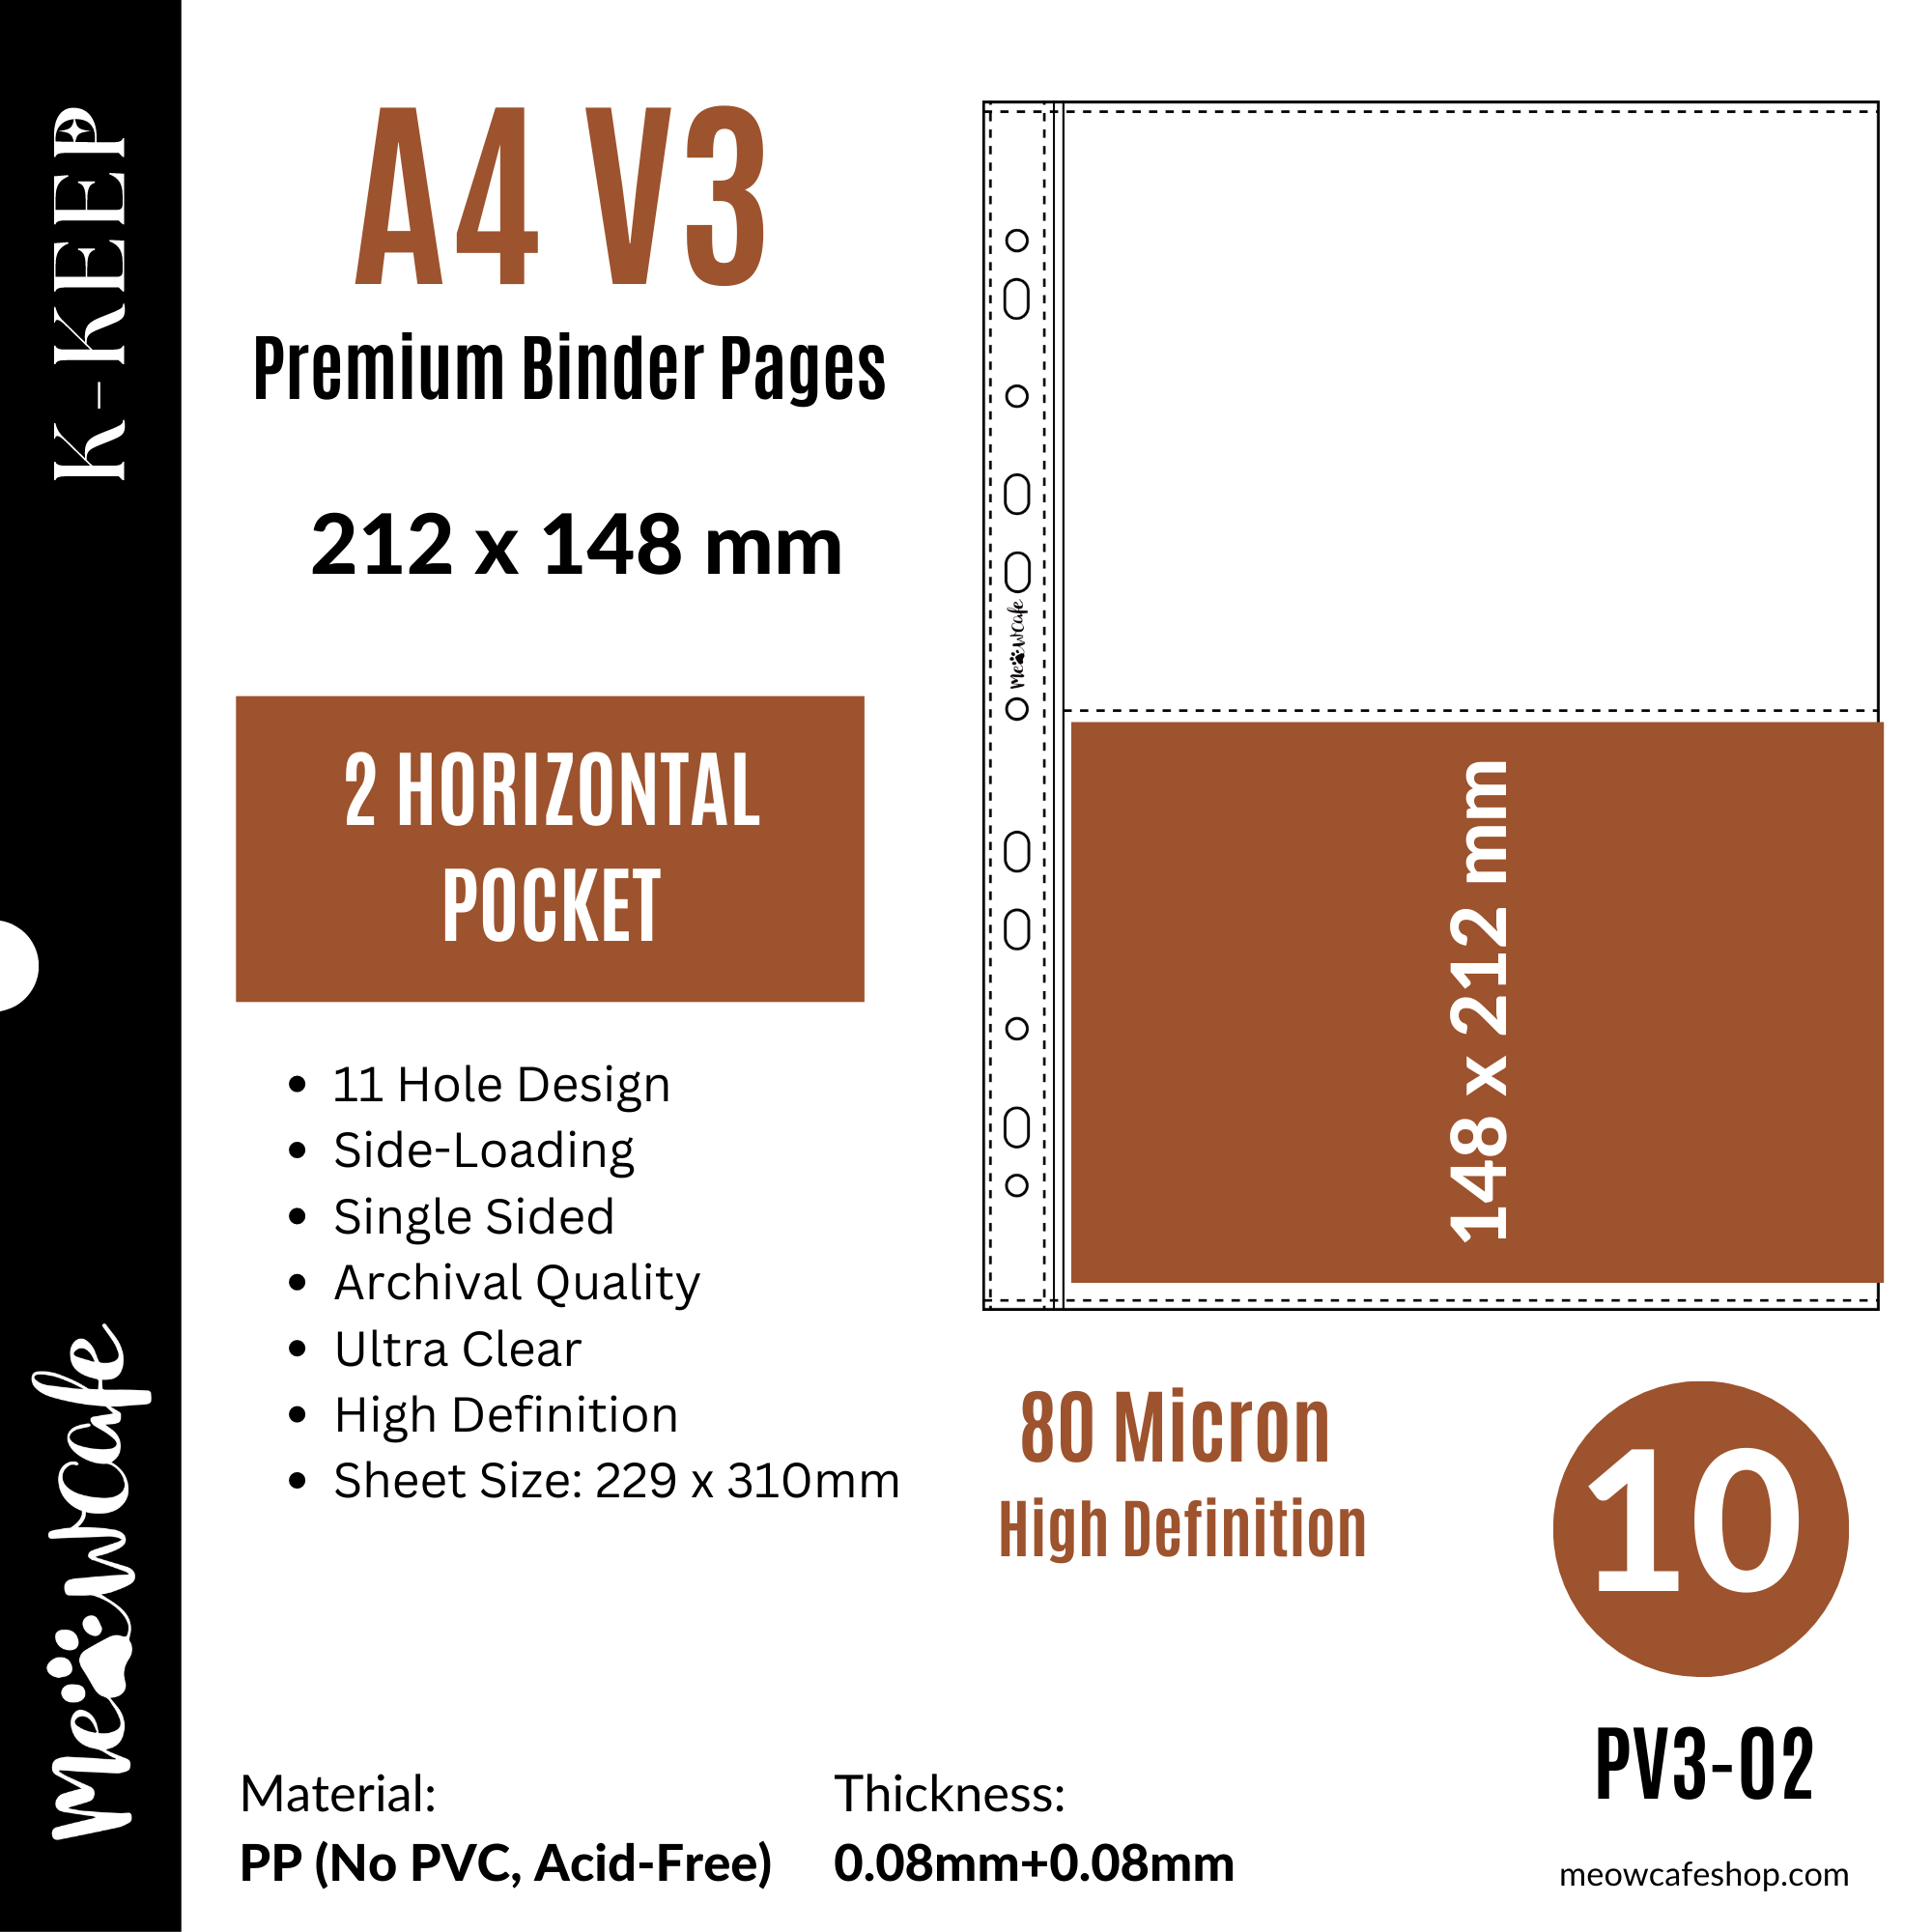 K-KEEP [A4 V3] -  2 Horizontal Pocket- 11 Holes Premium Binder Pages, 80 Micron Thick, High Definition (Pack of 10) - (PV3-02)